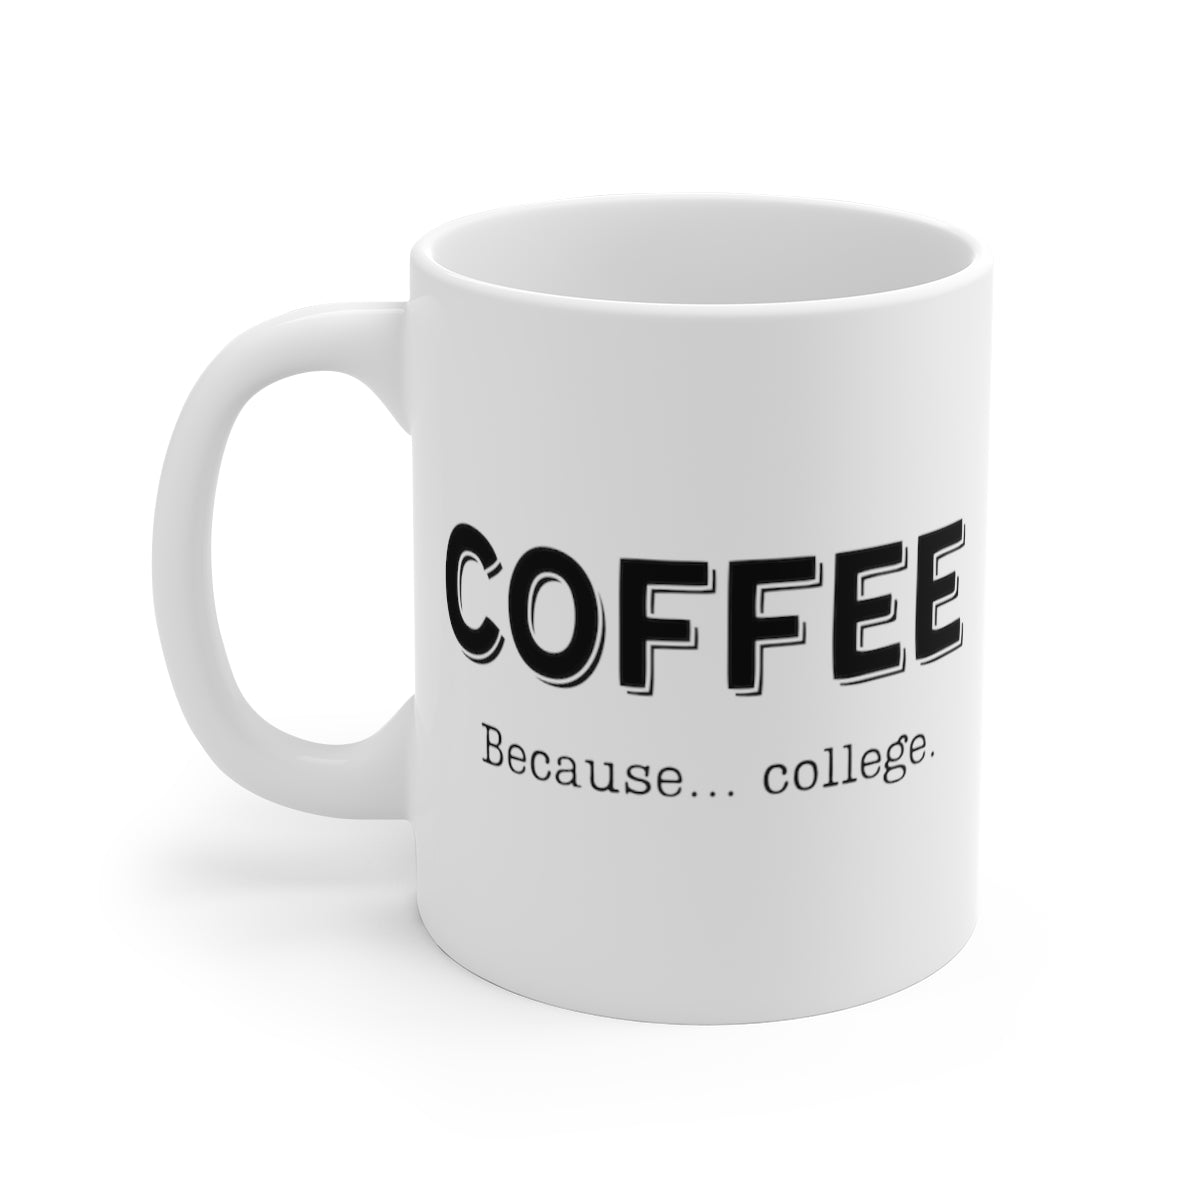 Coffee... Because College | Funny Coffee Mug, Snarky Gift for Teachers & Students | 11oz